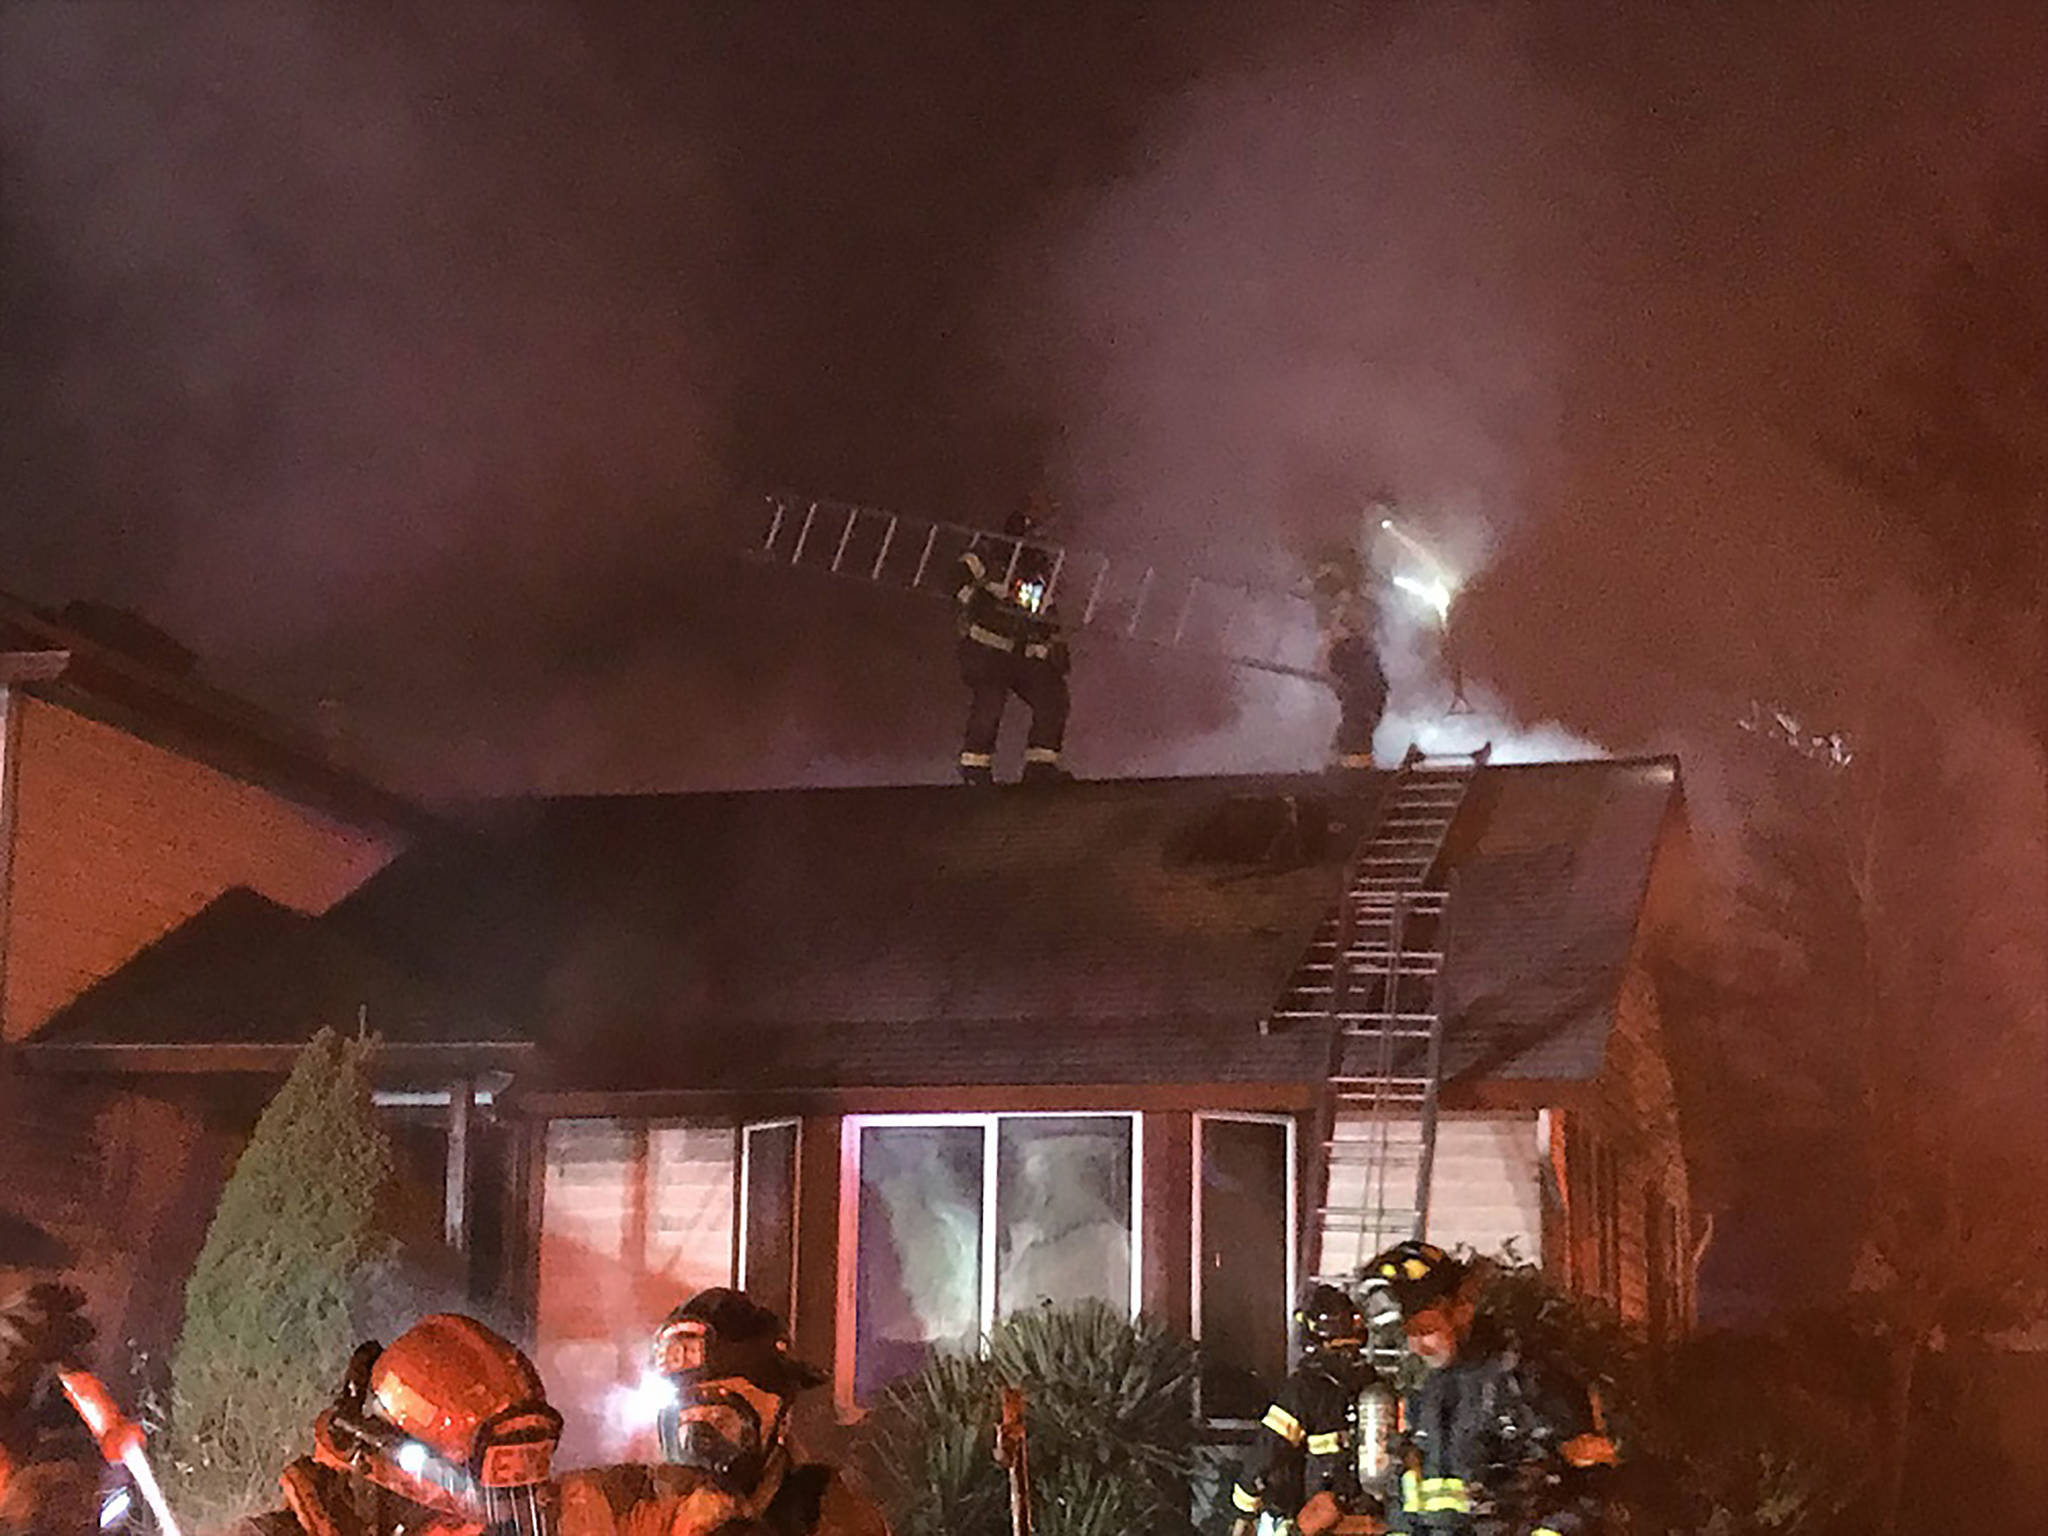 Local firefighters work to extinguish a Kent house fire early Monday morning. COURTESY PHOTO, Puget Sound Regional Fire Authority